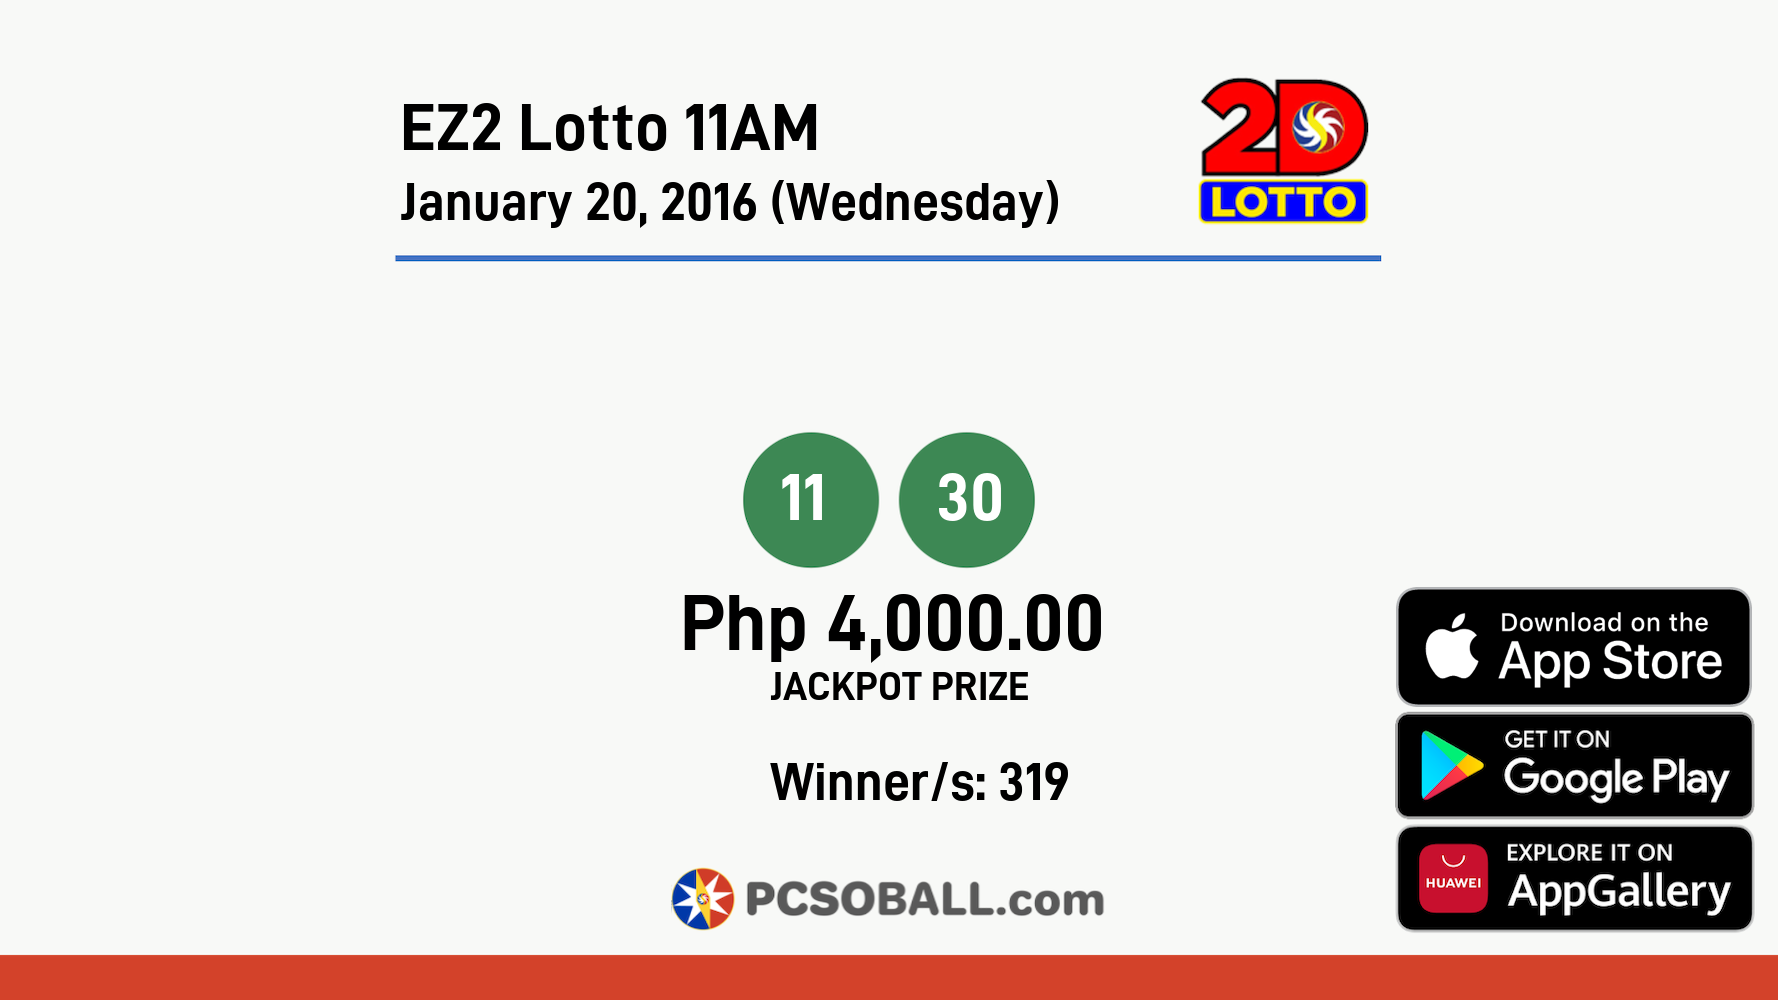 EZ2 Lotto 11AM January 20, 2016 (Wednesday) Result